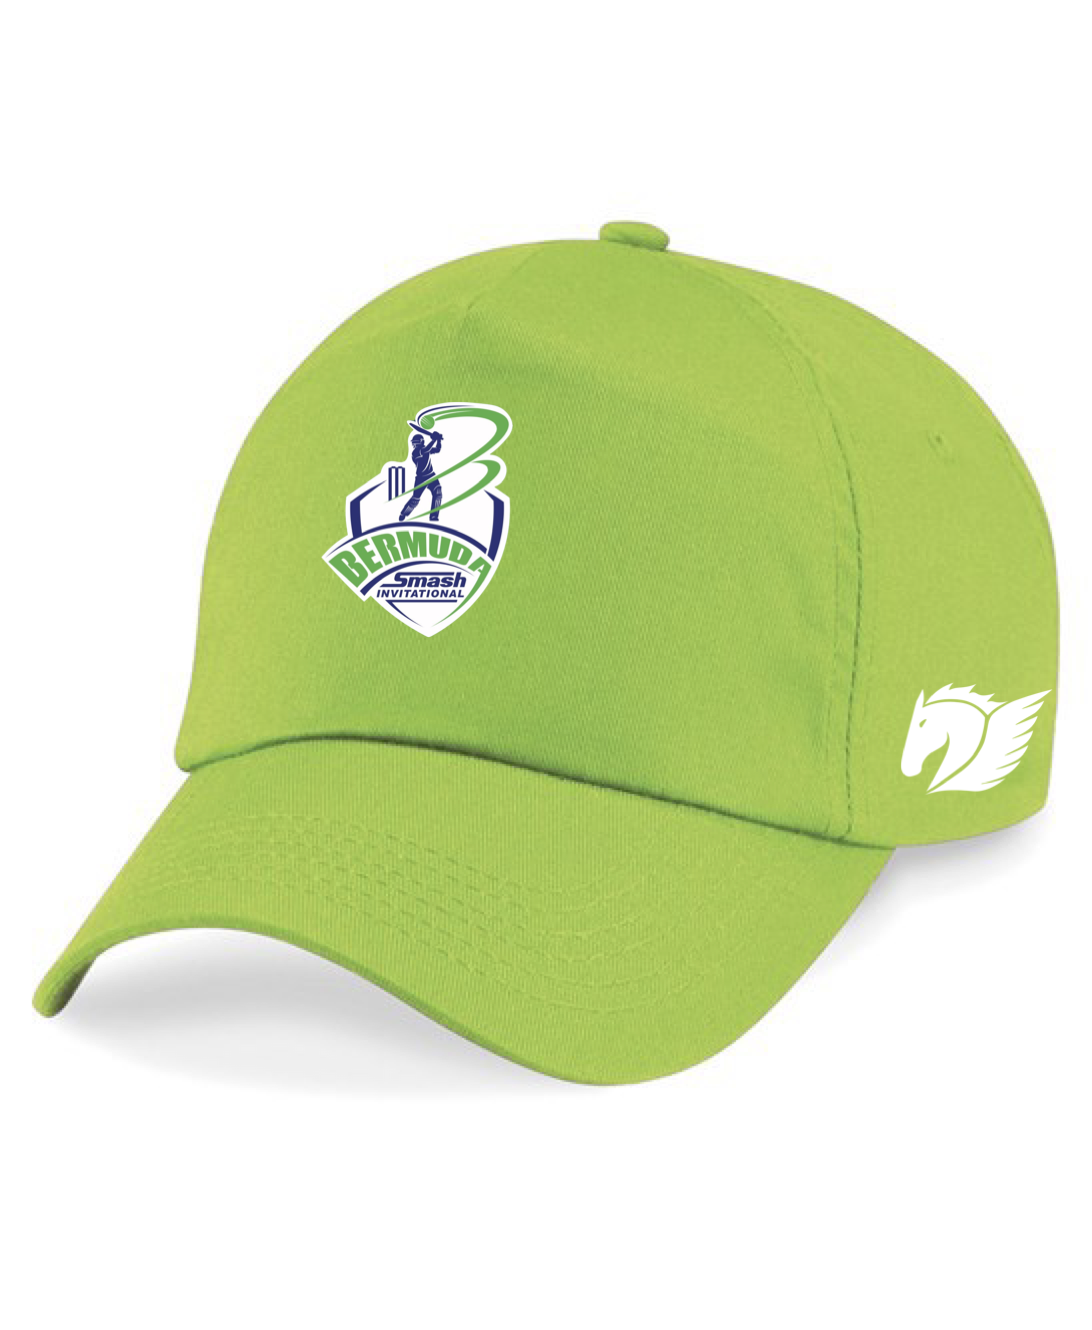 BSI Supporters Cap - Lime Green